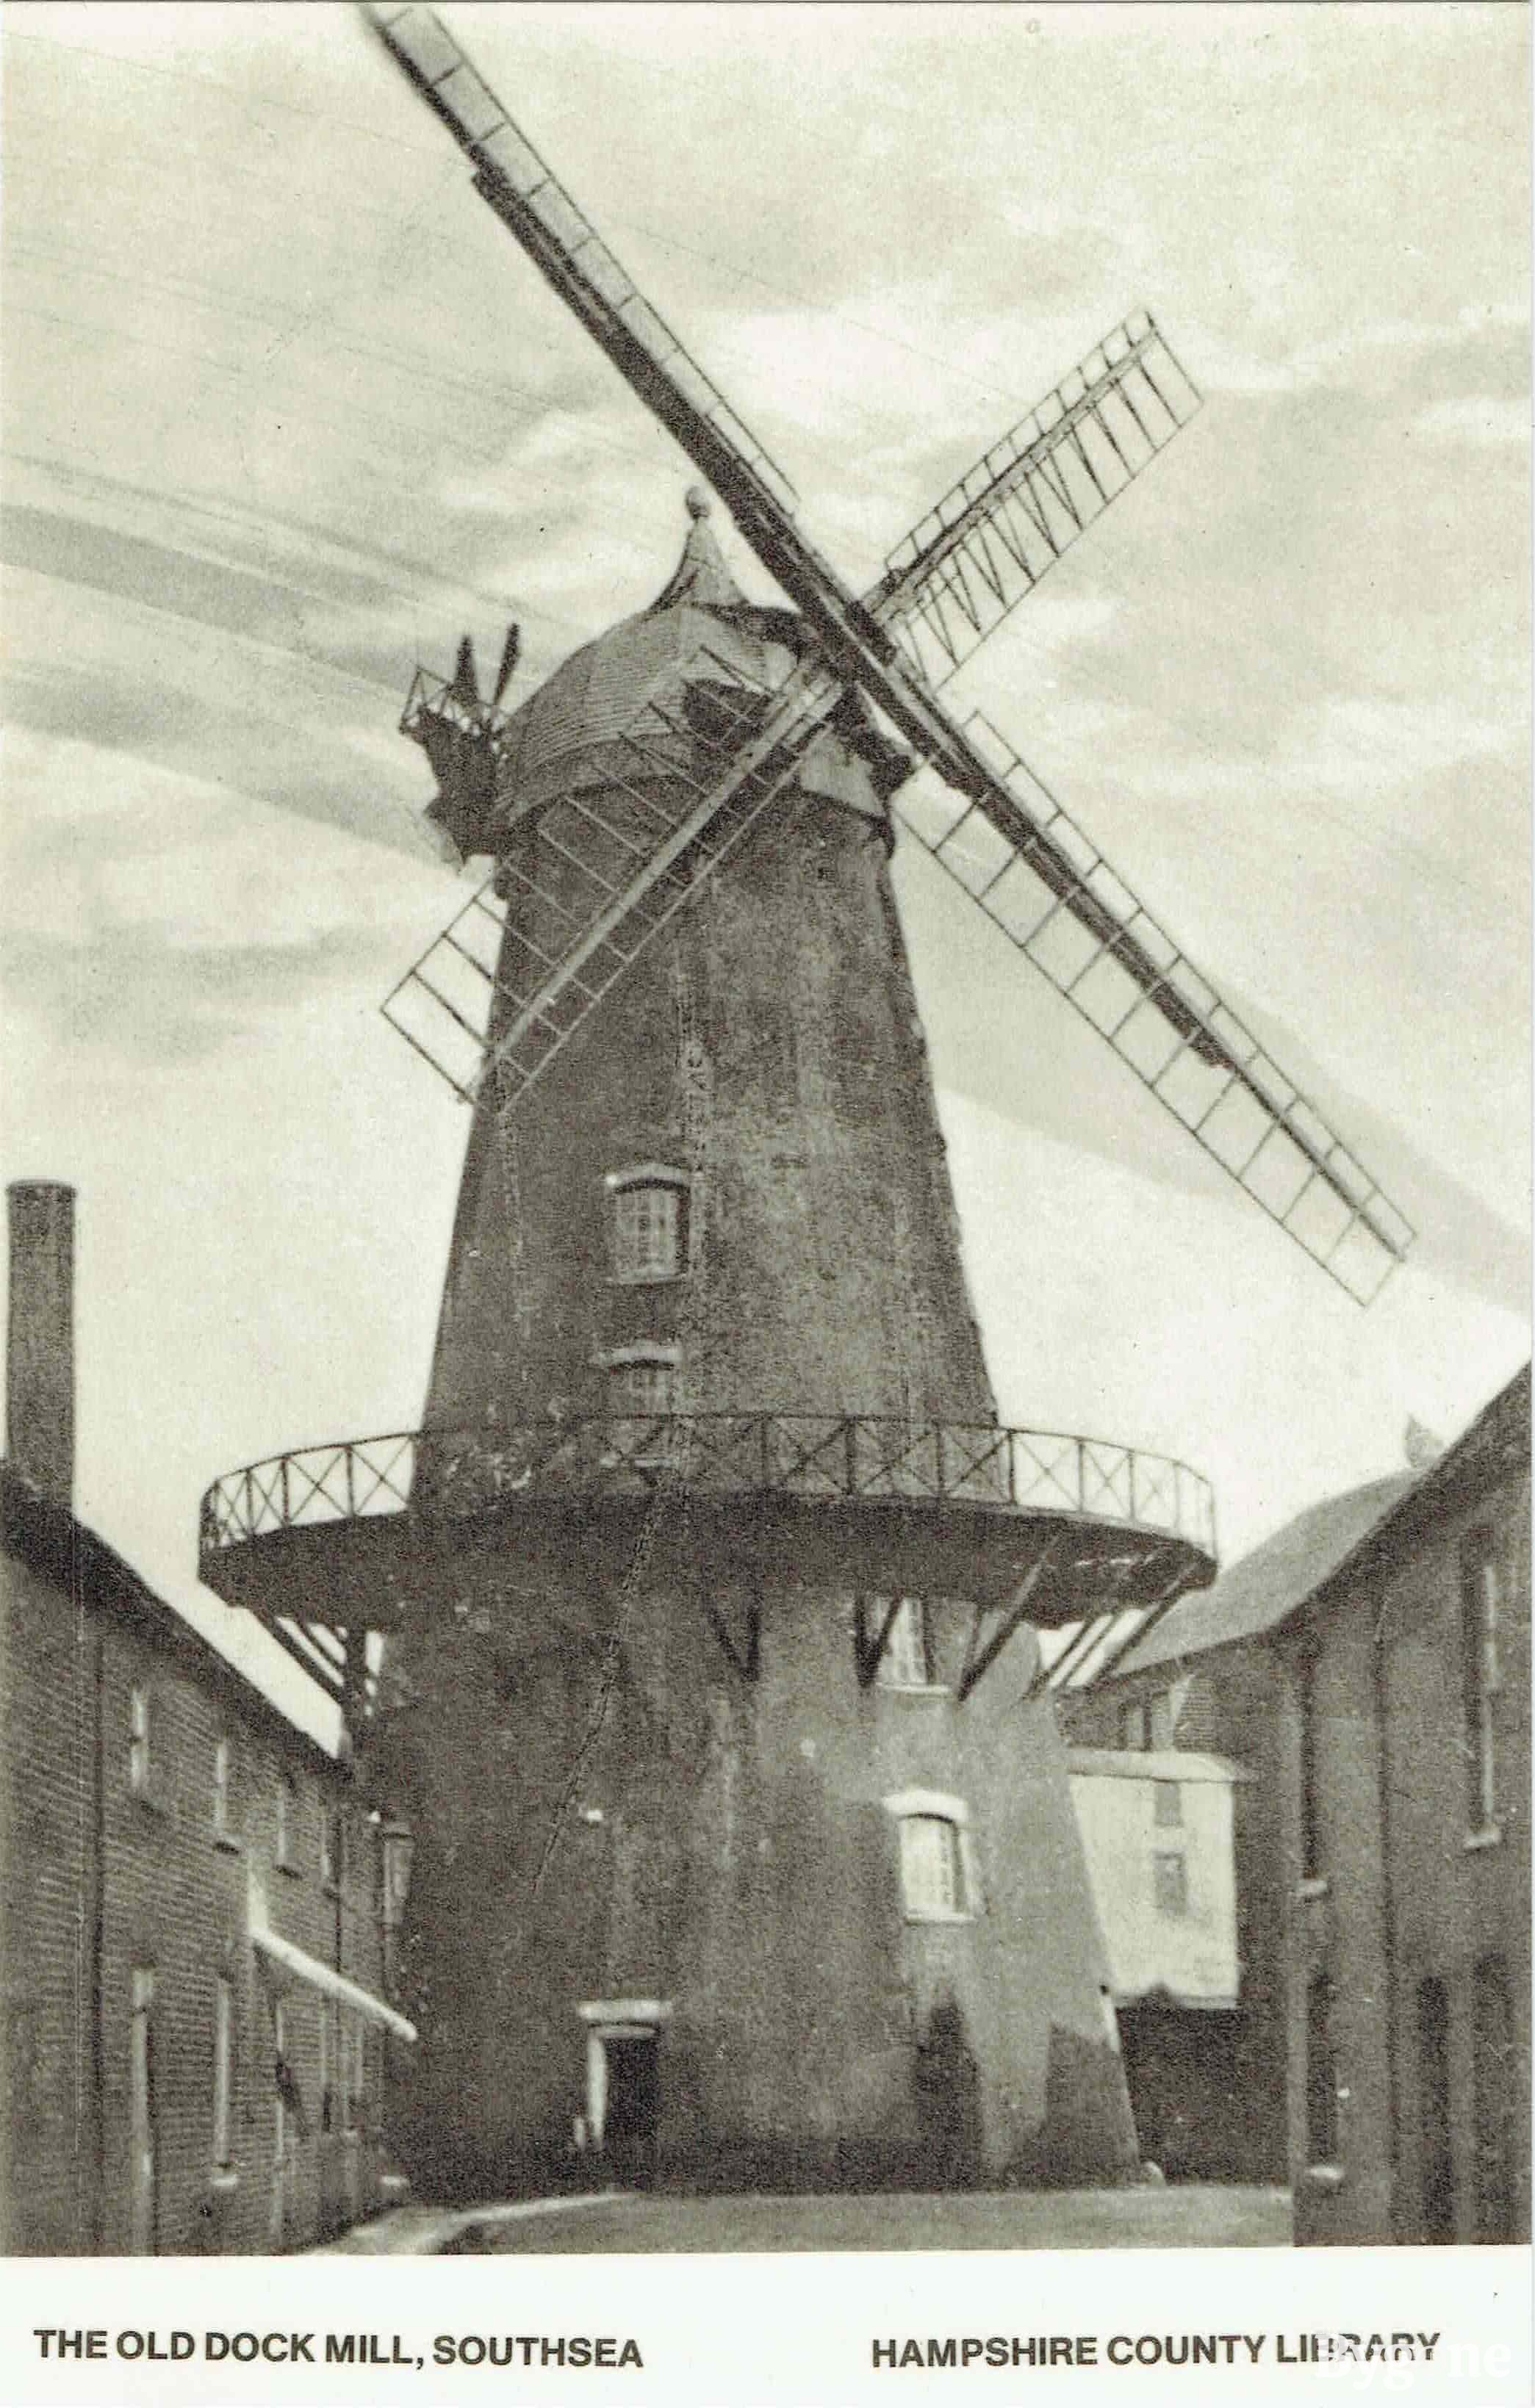 The Old Dock Mill, Southsea